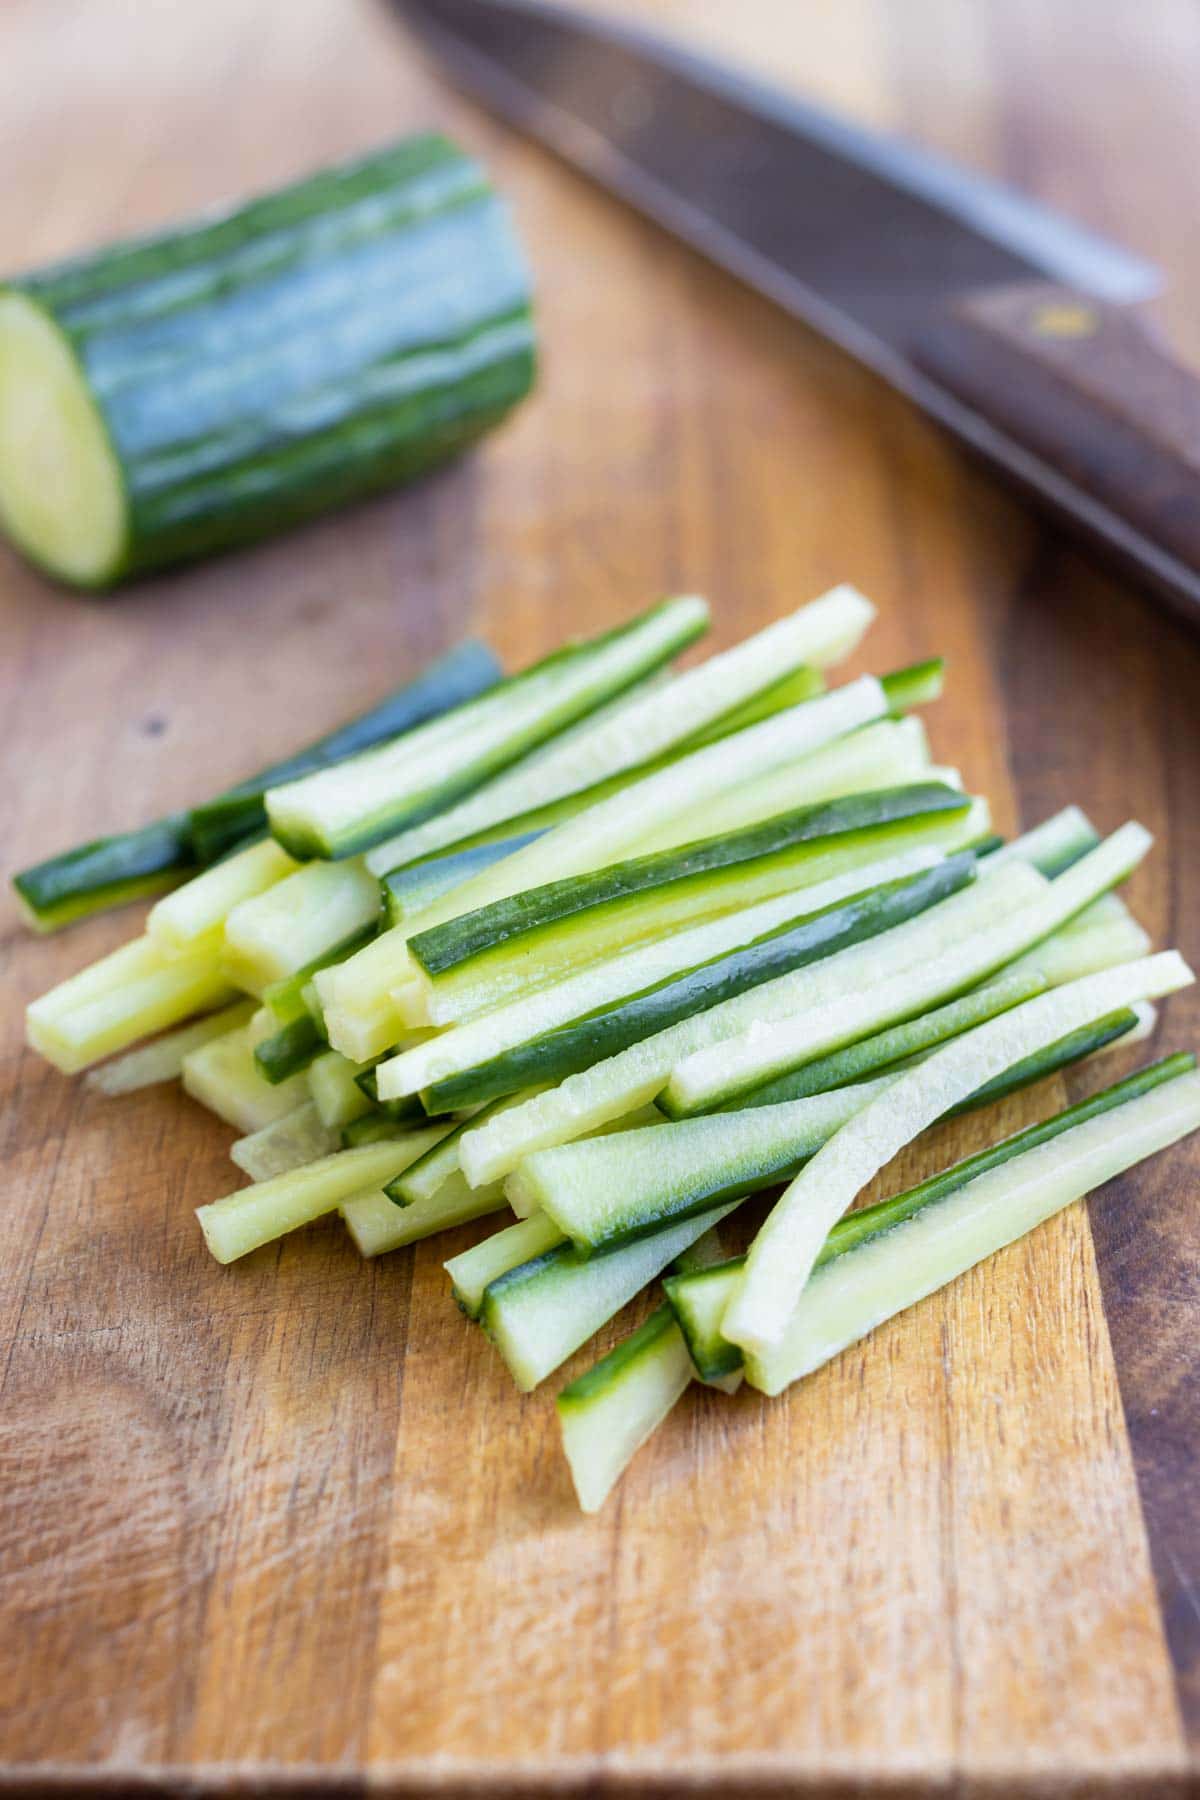 Cucumbers are cut Julienne style with a sharp knife.